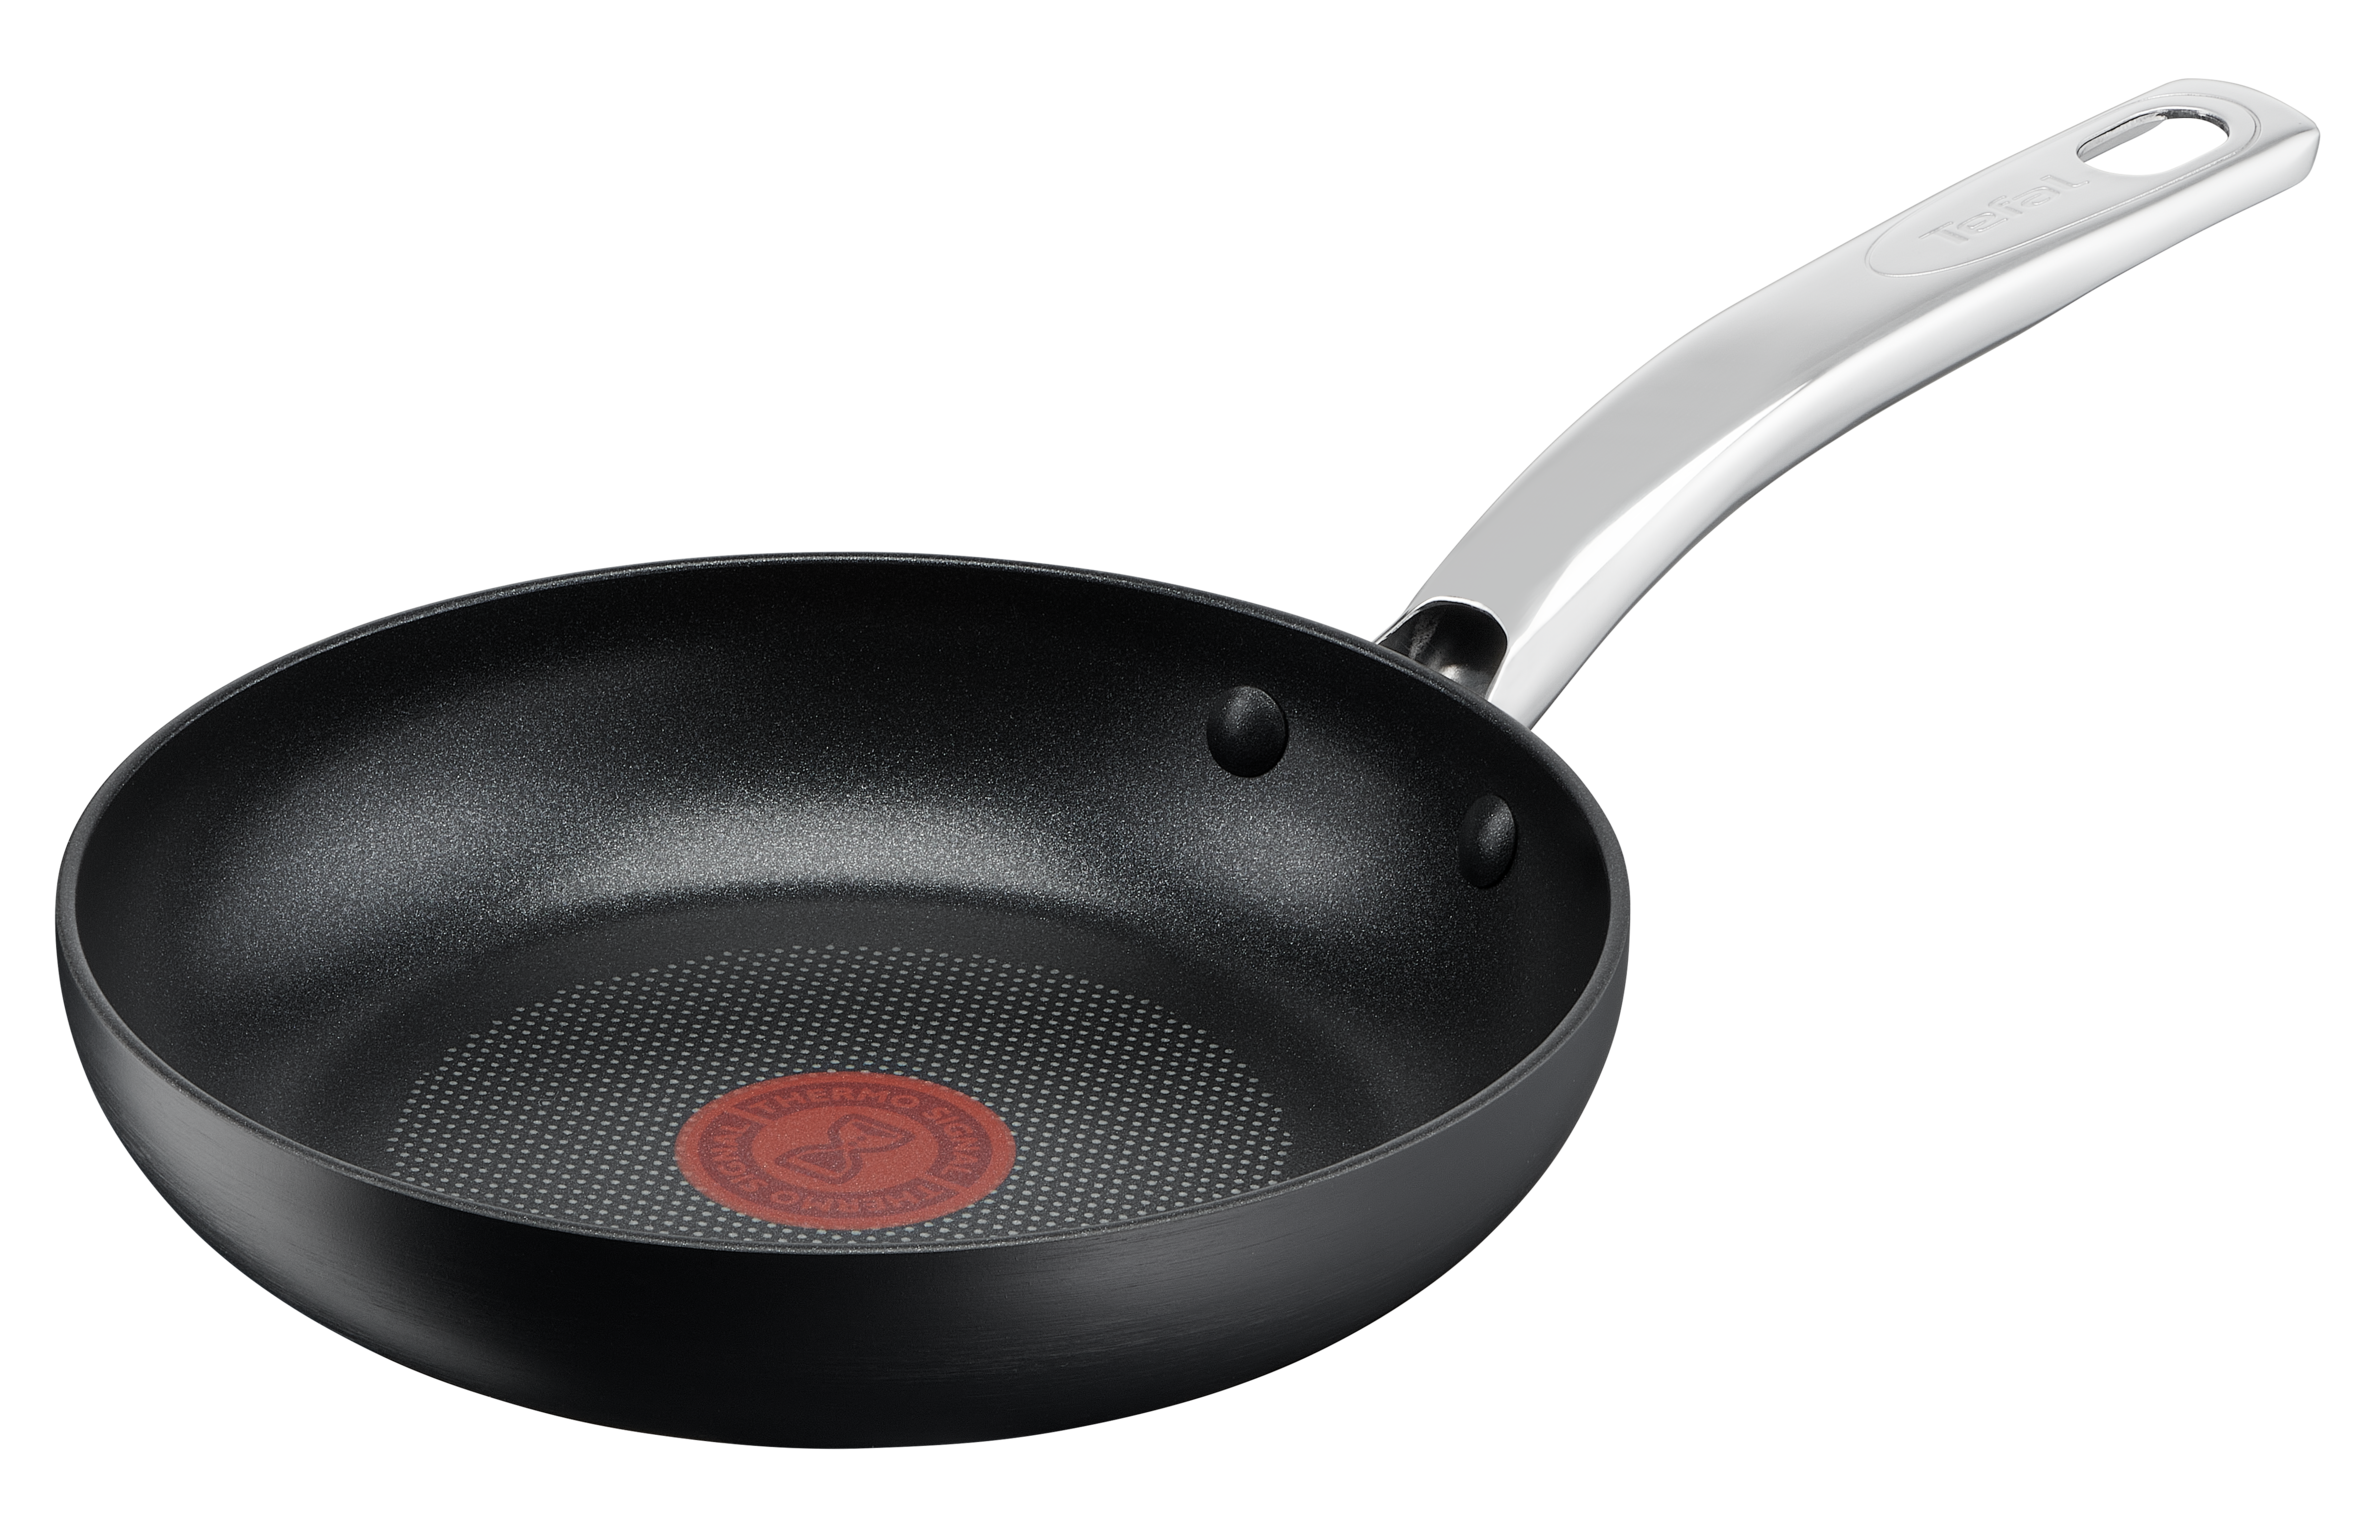 Tefal Gourmet Hard Anodised Non-Stick Frypan 20cm